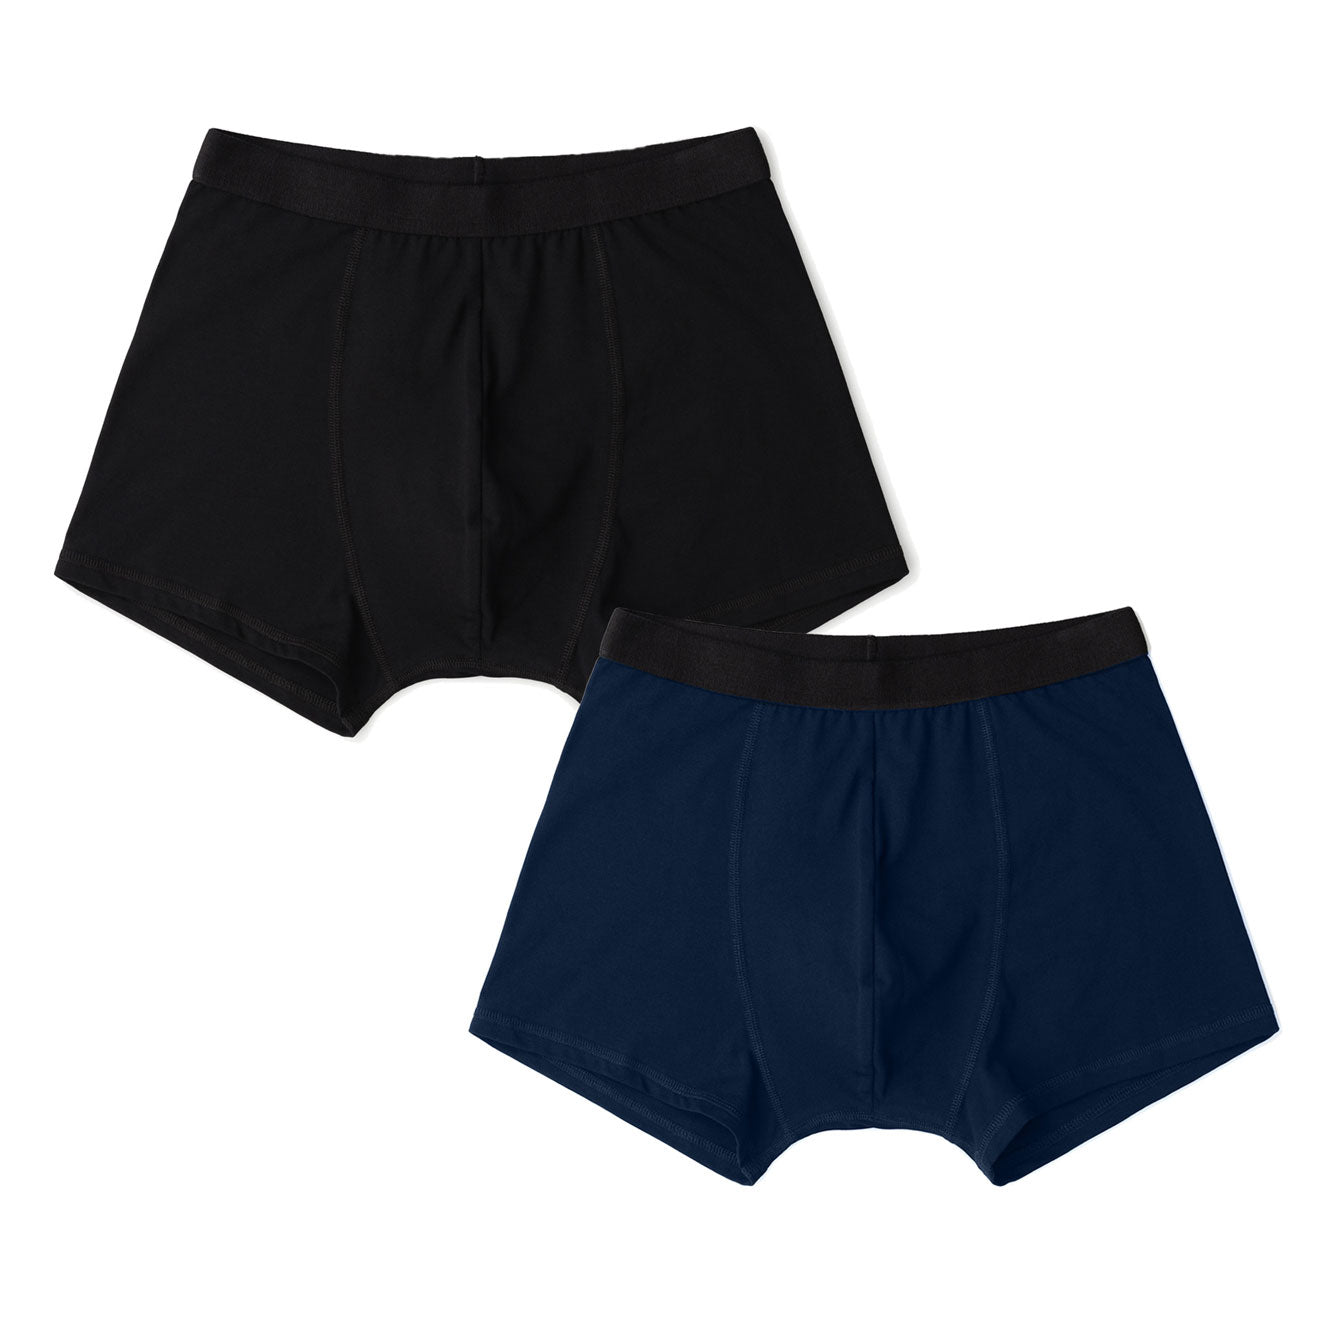 Black Navy Organic & Recycled cotton Boxer Briefs, first fit promise 2 pack